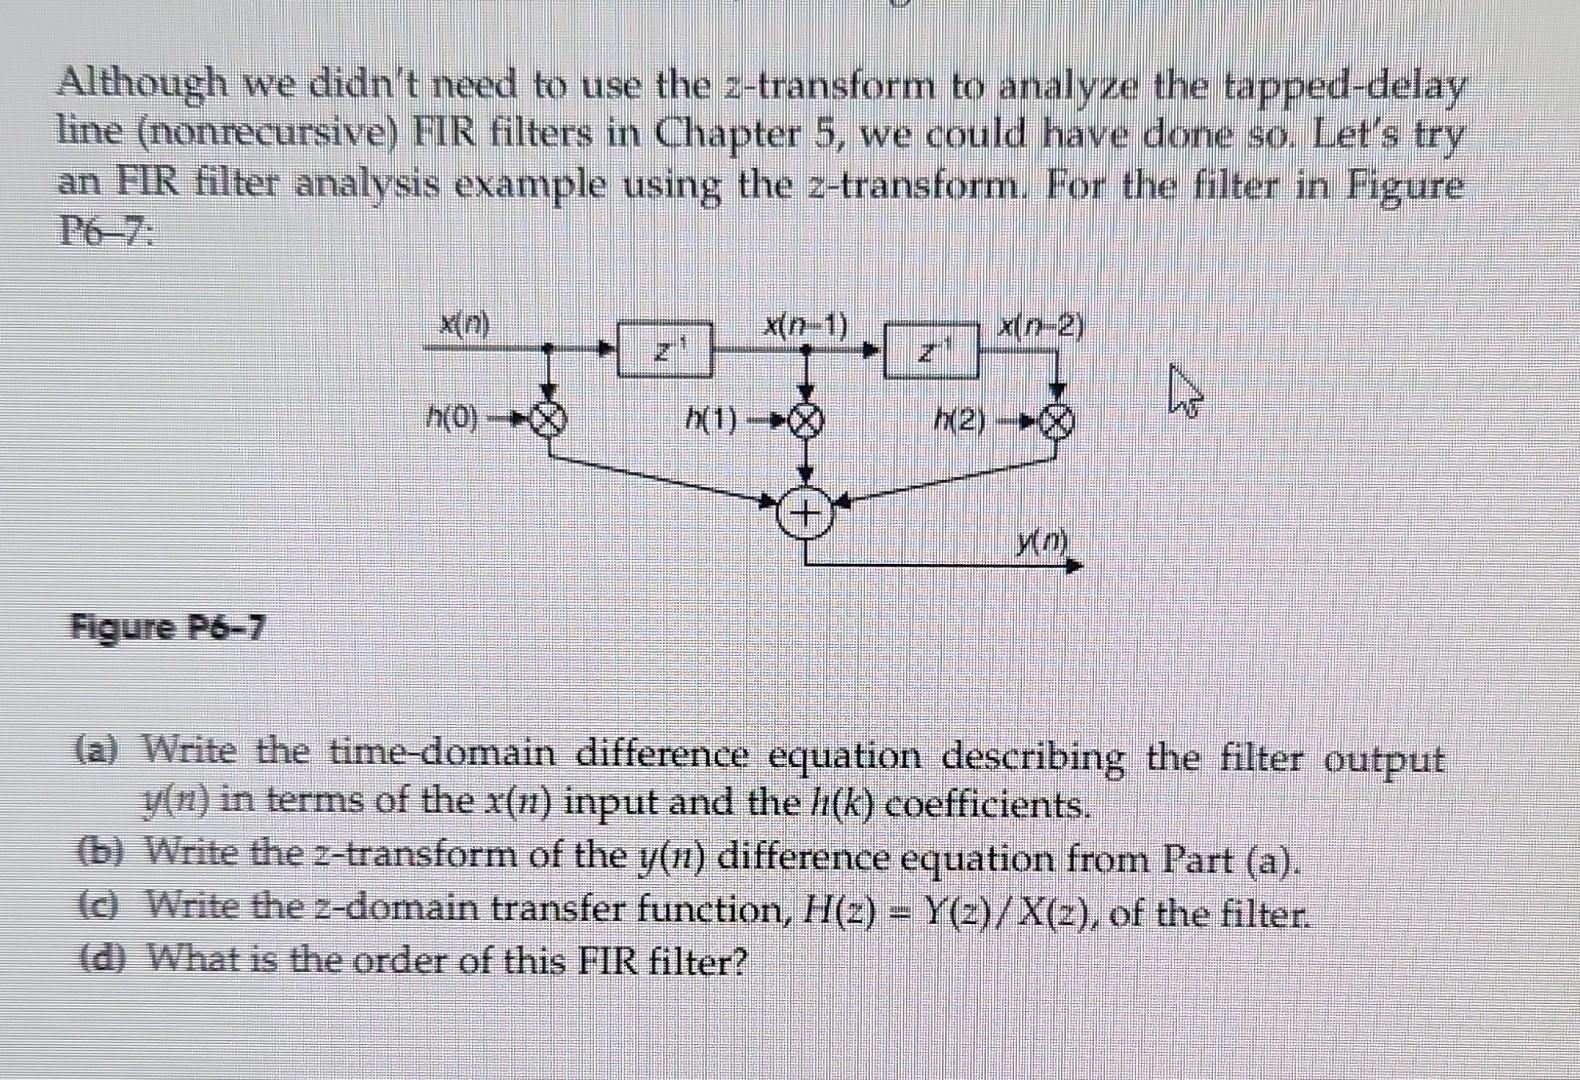 Although we didn't need to use the 2-transform to analyze the tapped-delay line (nonrecursive) FIR filters in